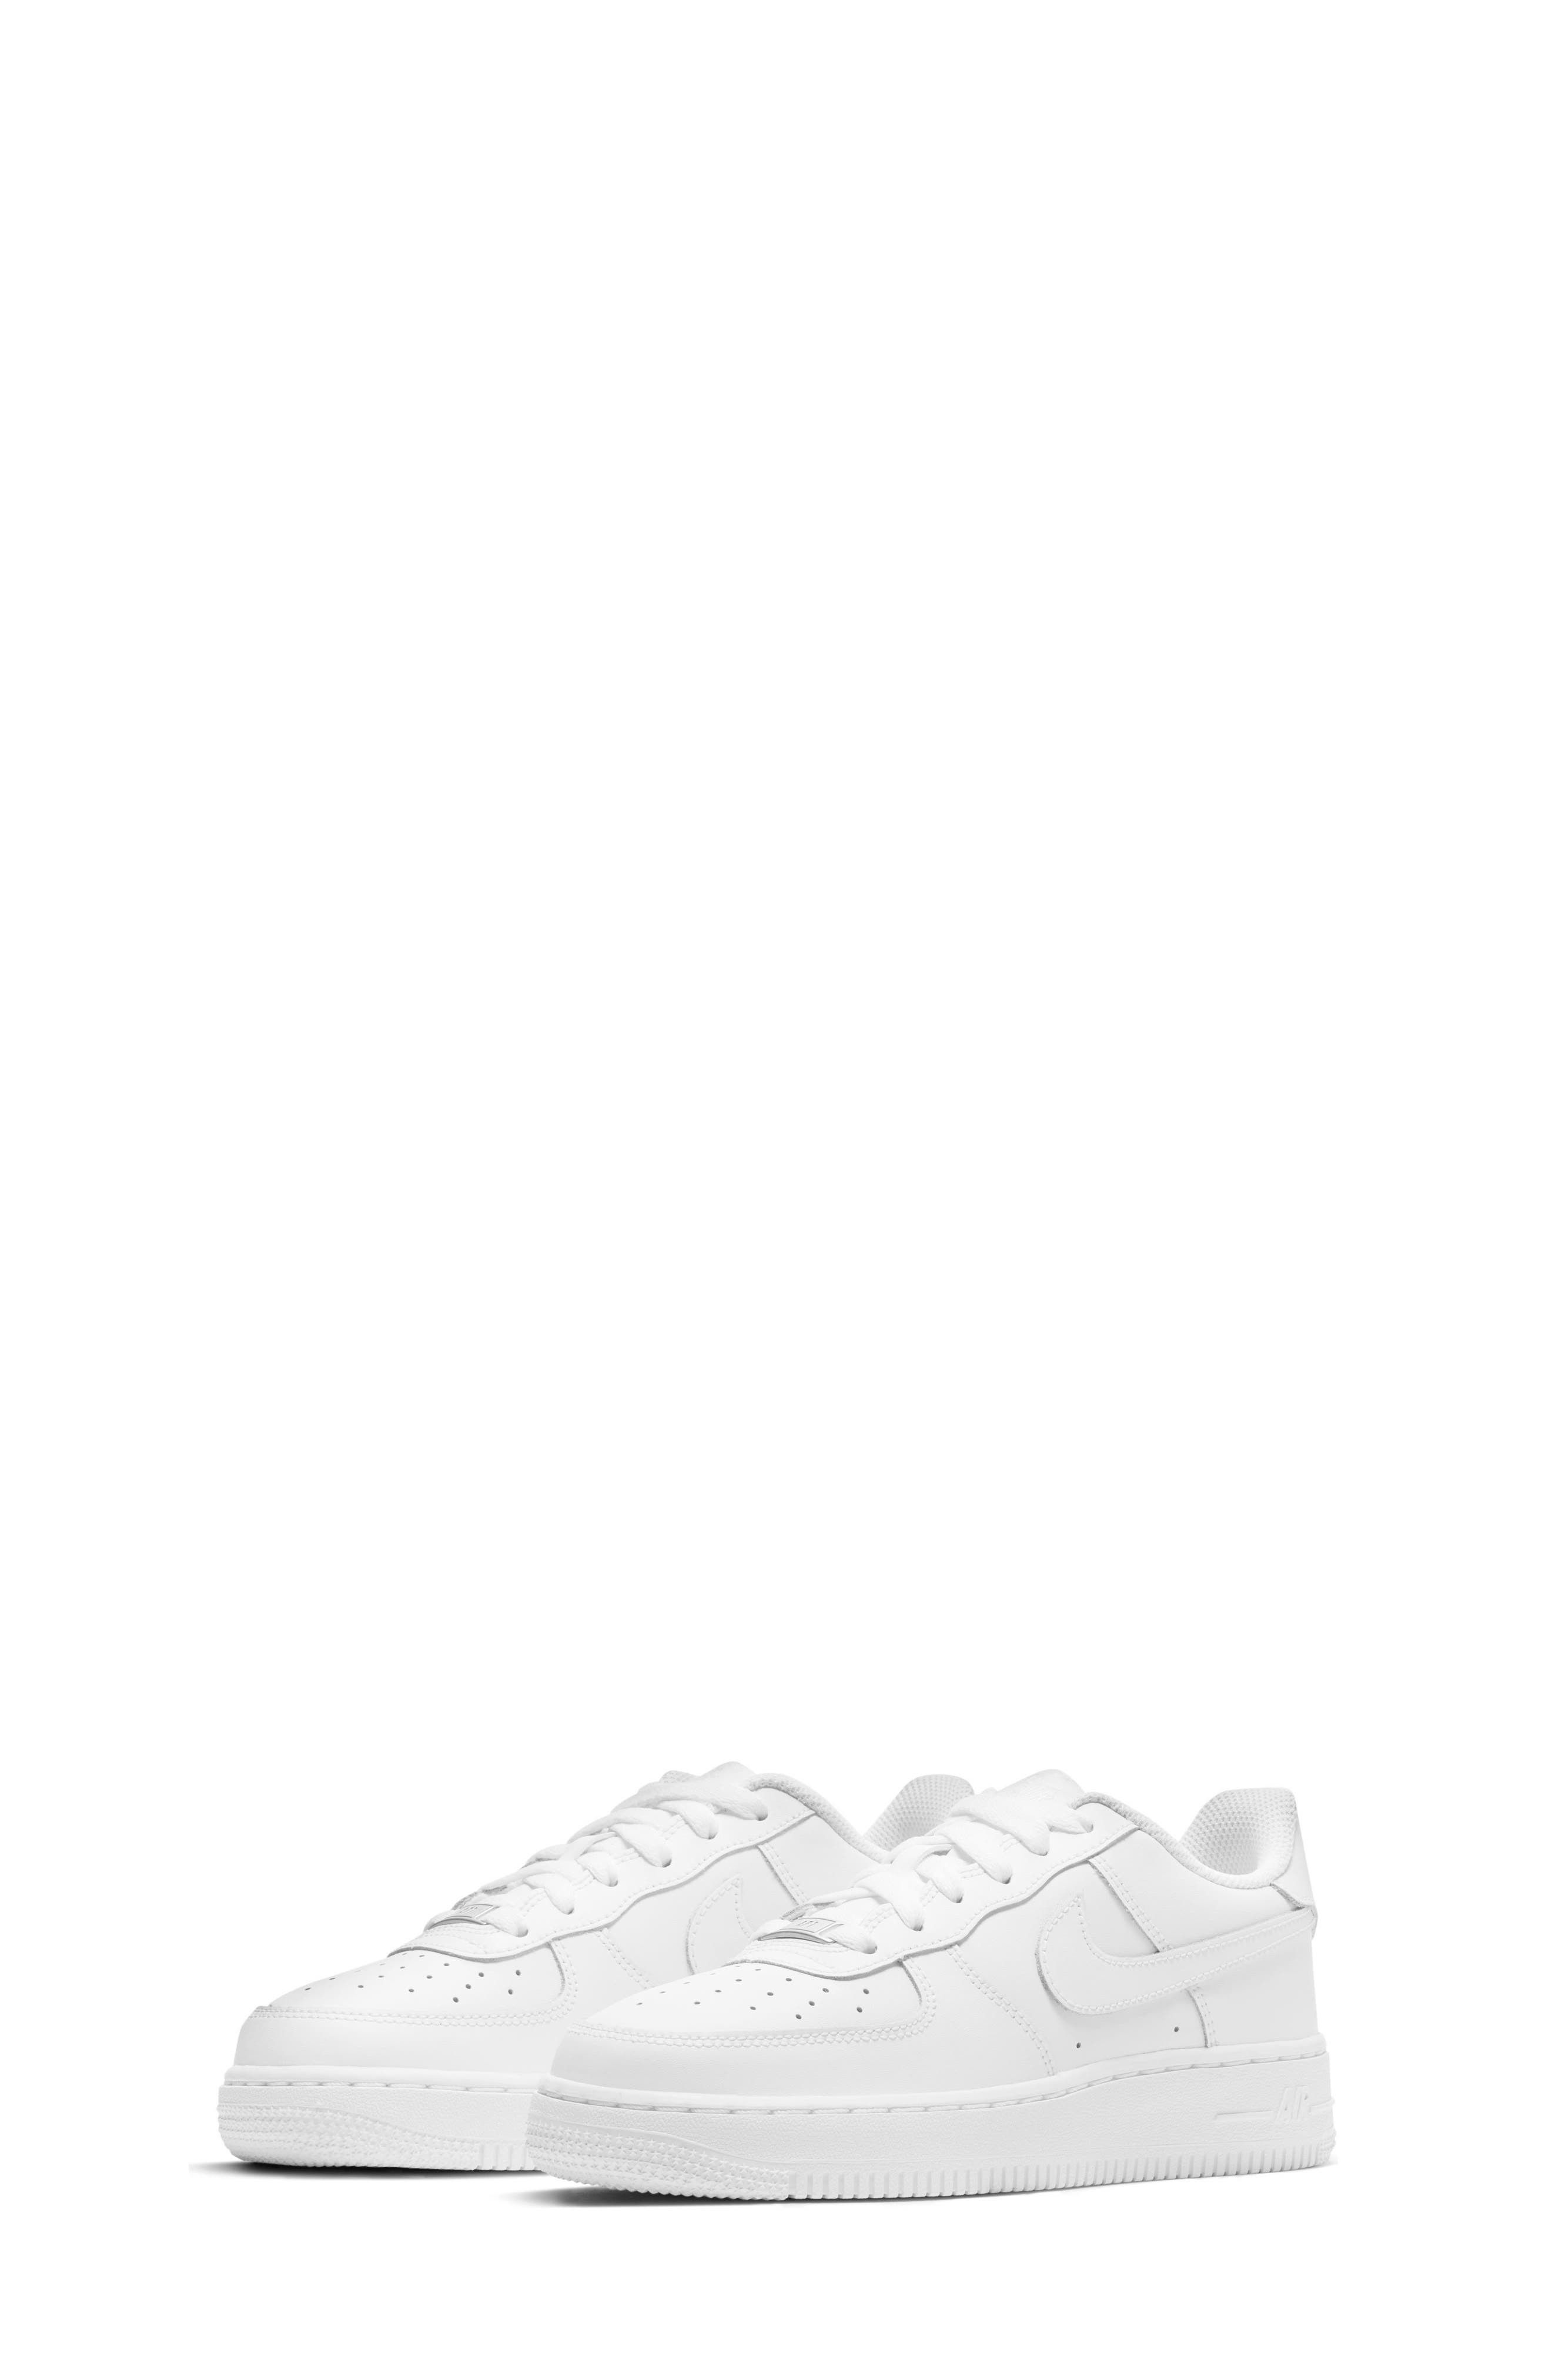 Nike Air(R) Force 1 Sneaker in White/White at Nordstrom, Size 6 M | Nordstrom